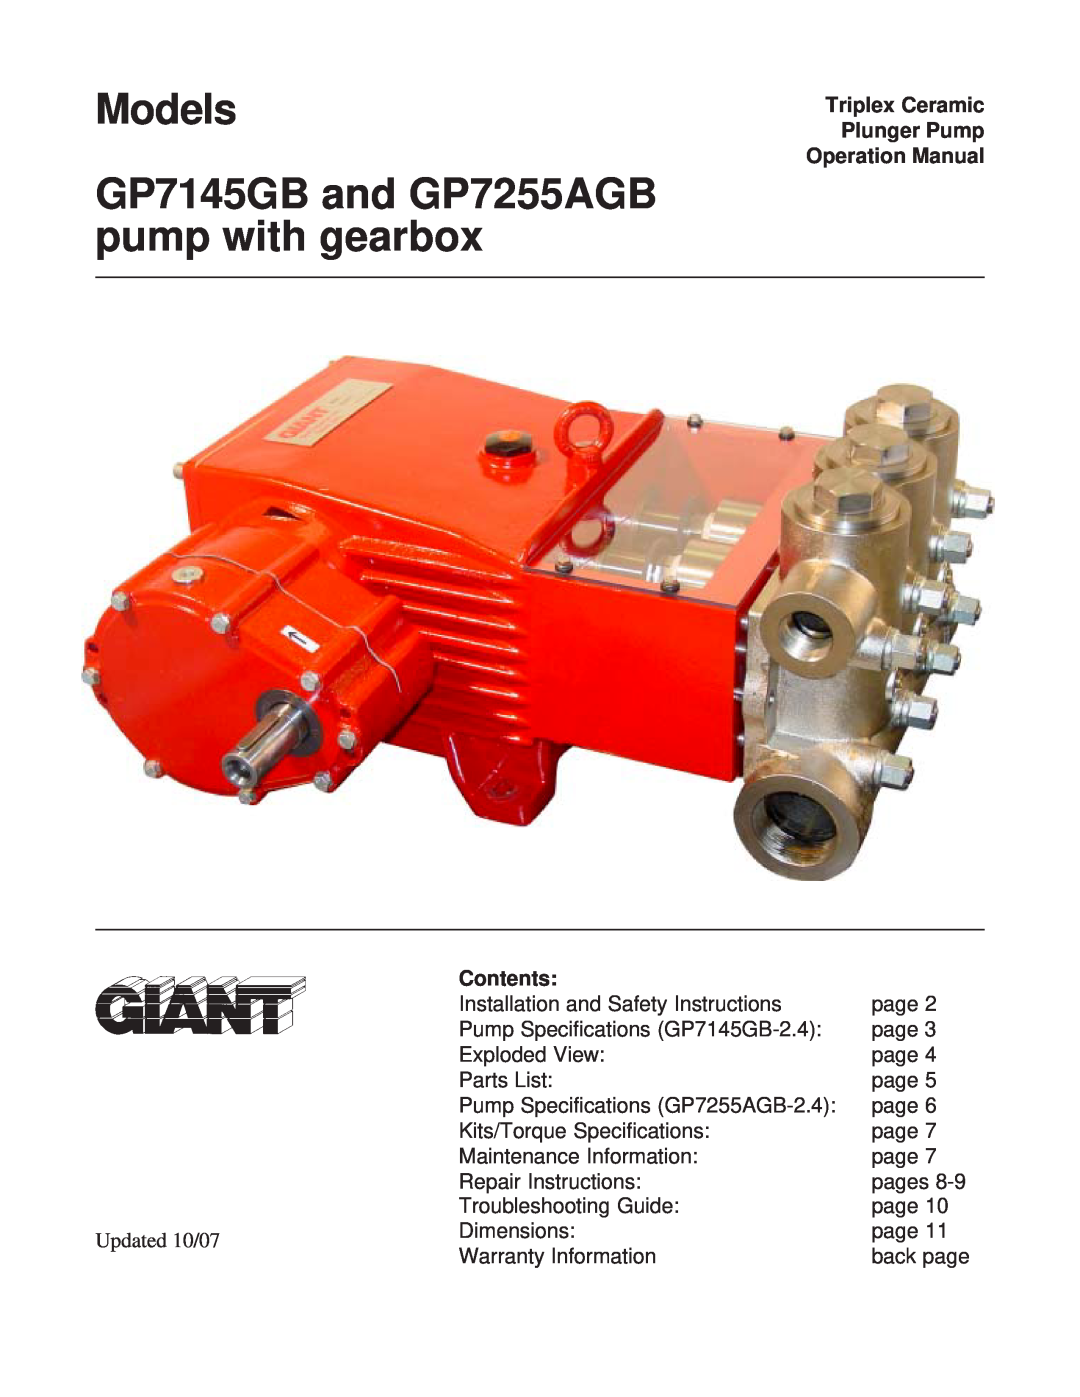 Giant operation manual Models GP7145GB and GP7255AGB pump with gearbox, Triplex Ceramic Plunger Pump Operation Manual 